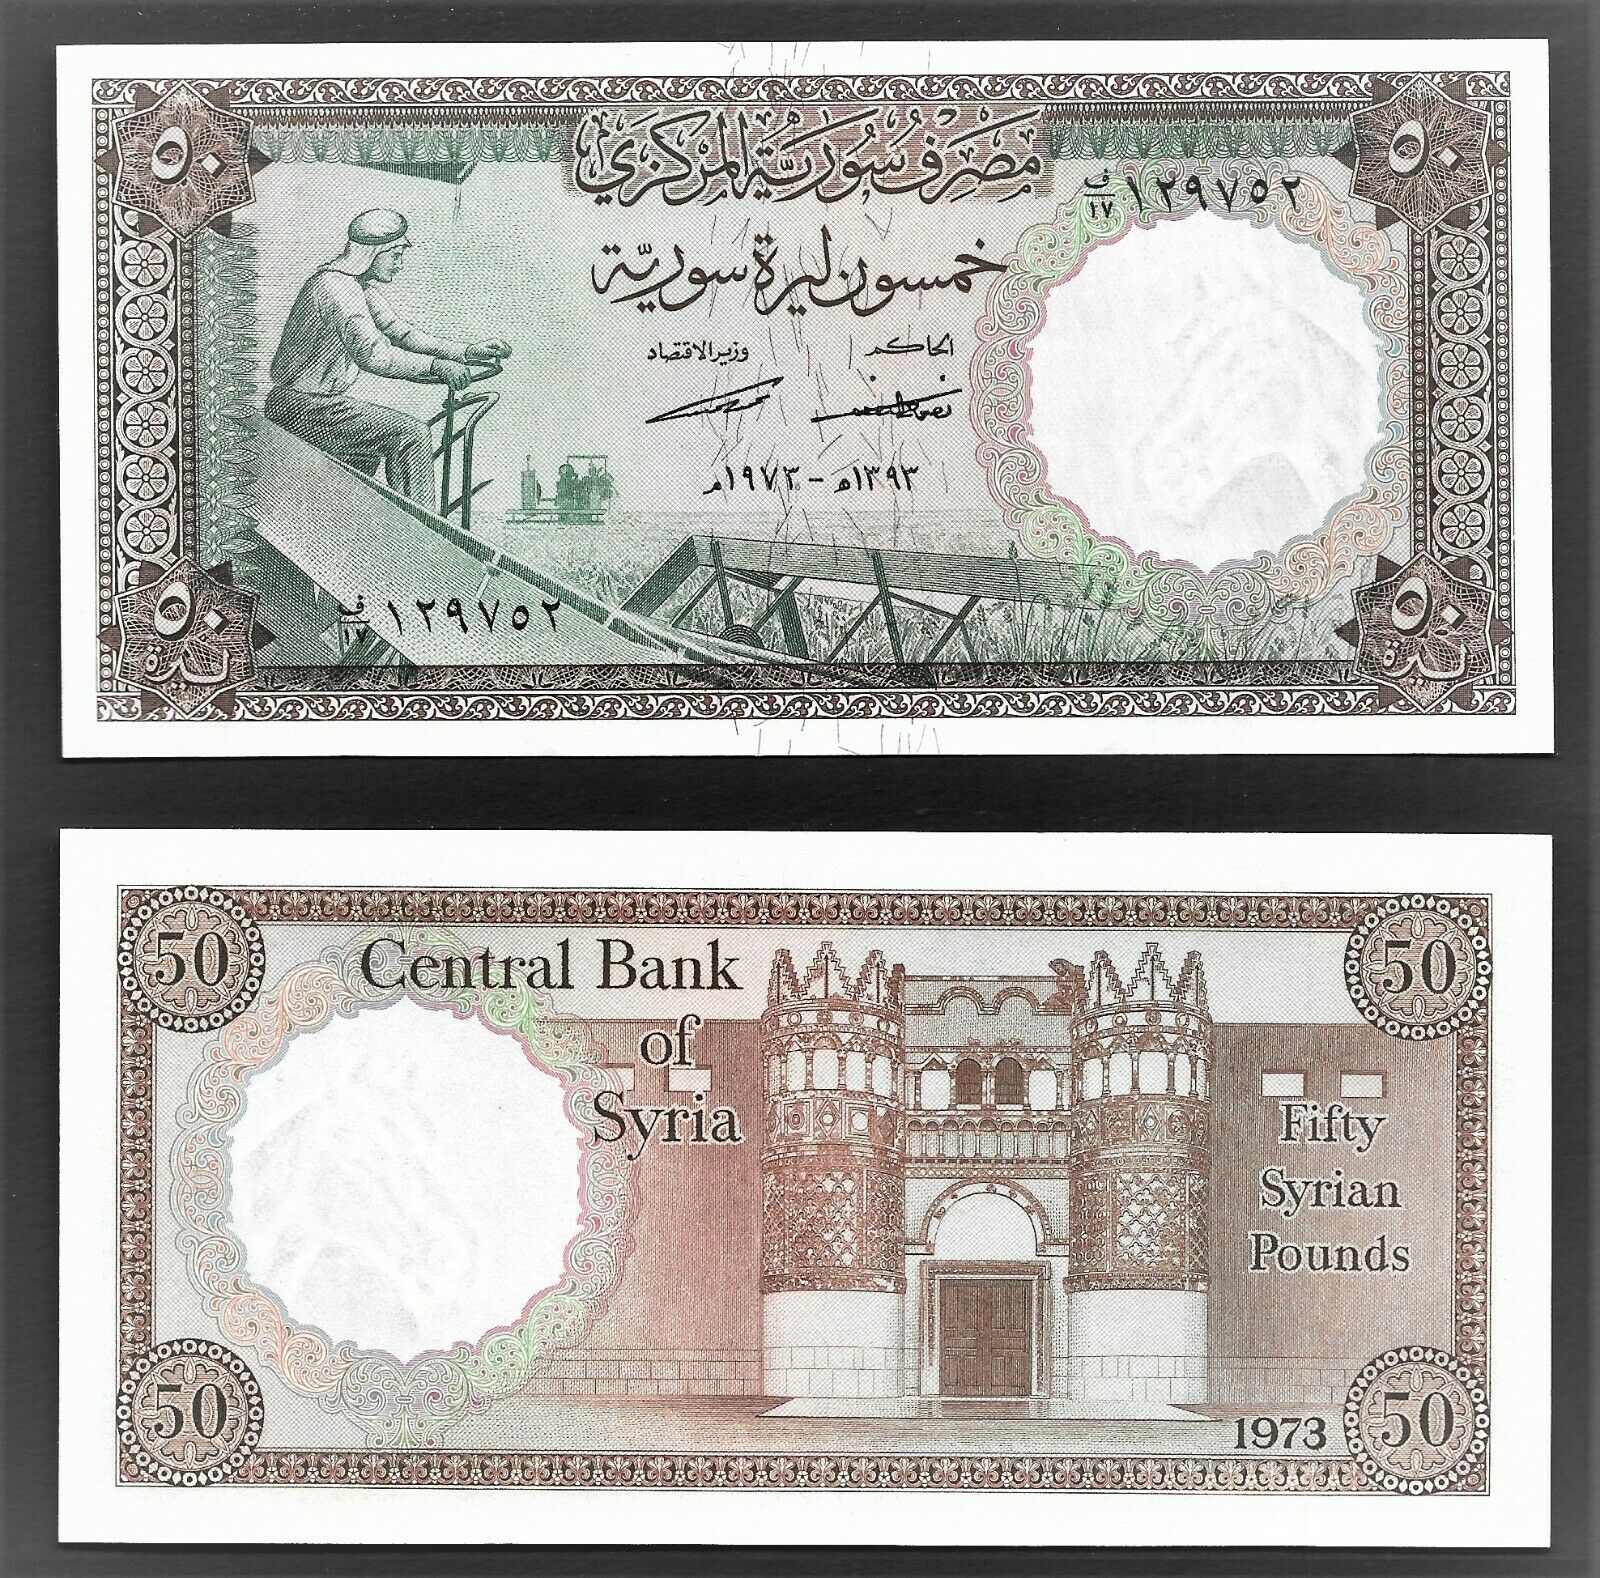 *gem/uncirculated* 1973 50 Pounds Syria P-97b >>stunning Note<<